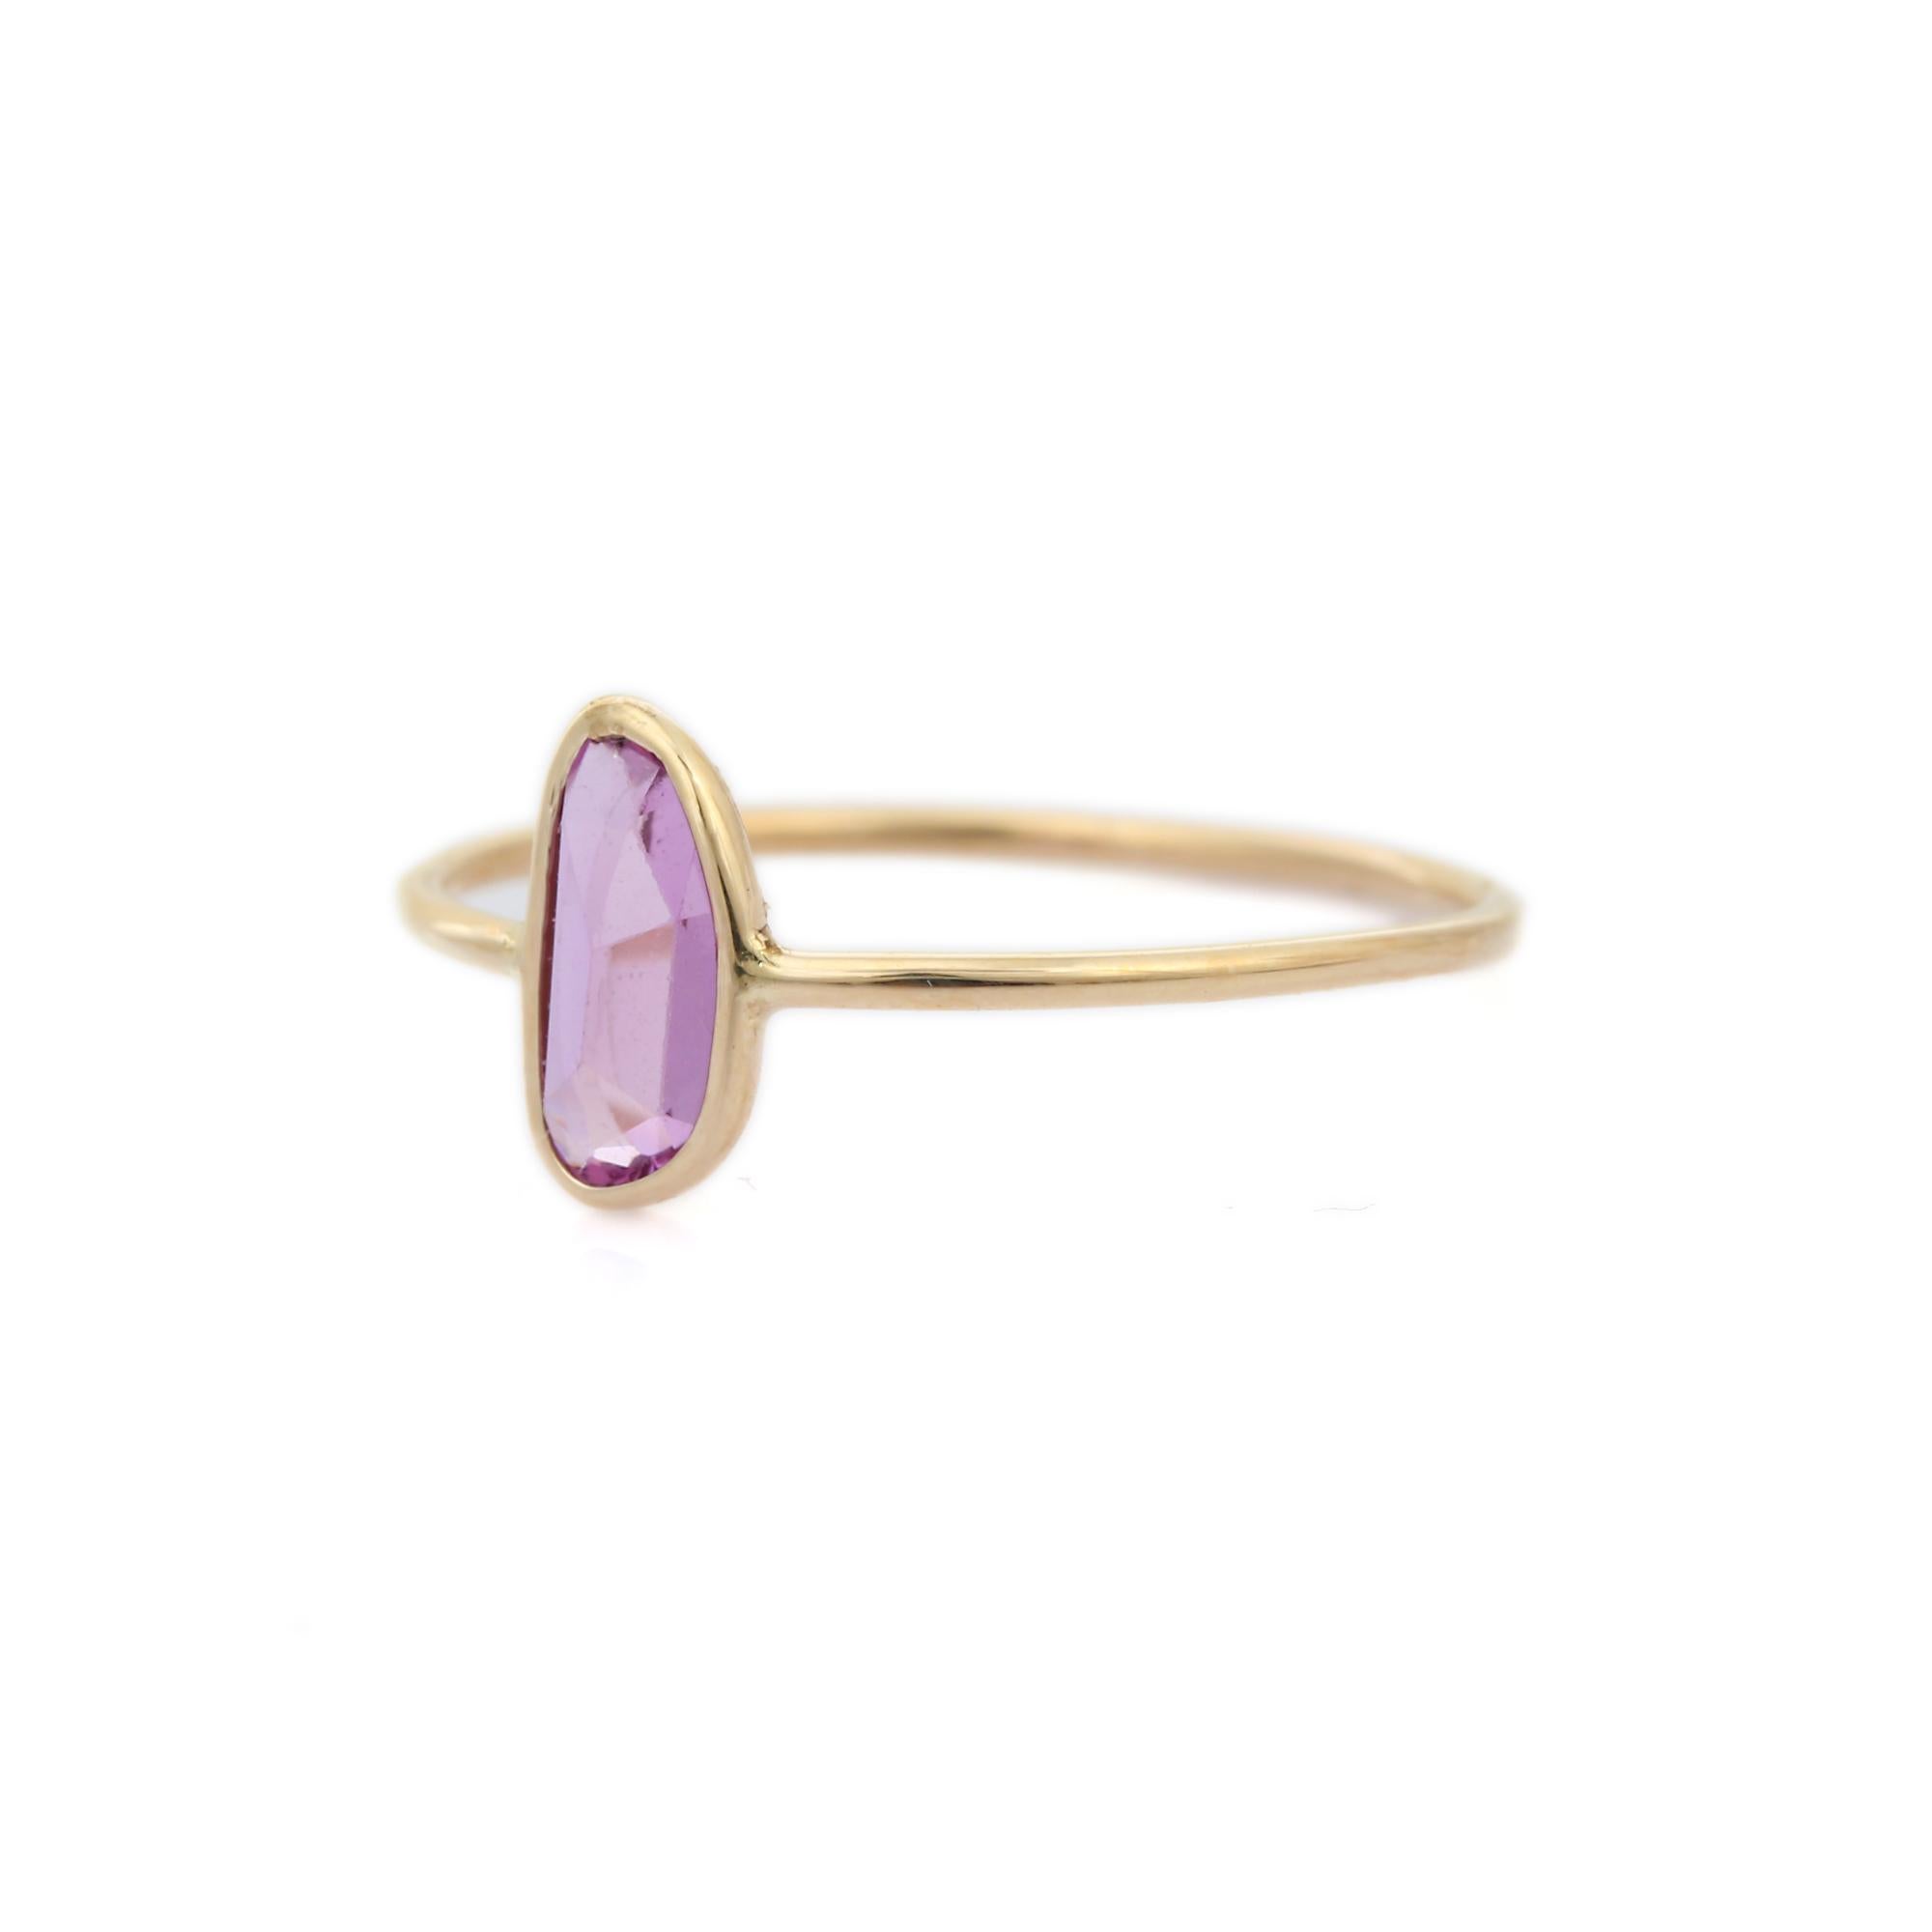 For Sale:  Handcrafted Pink Sapphire Gemstone Single Stone Ring in 14 Karat Yellow Gold 3